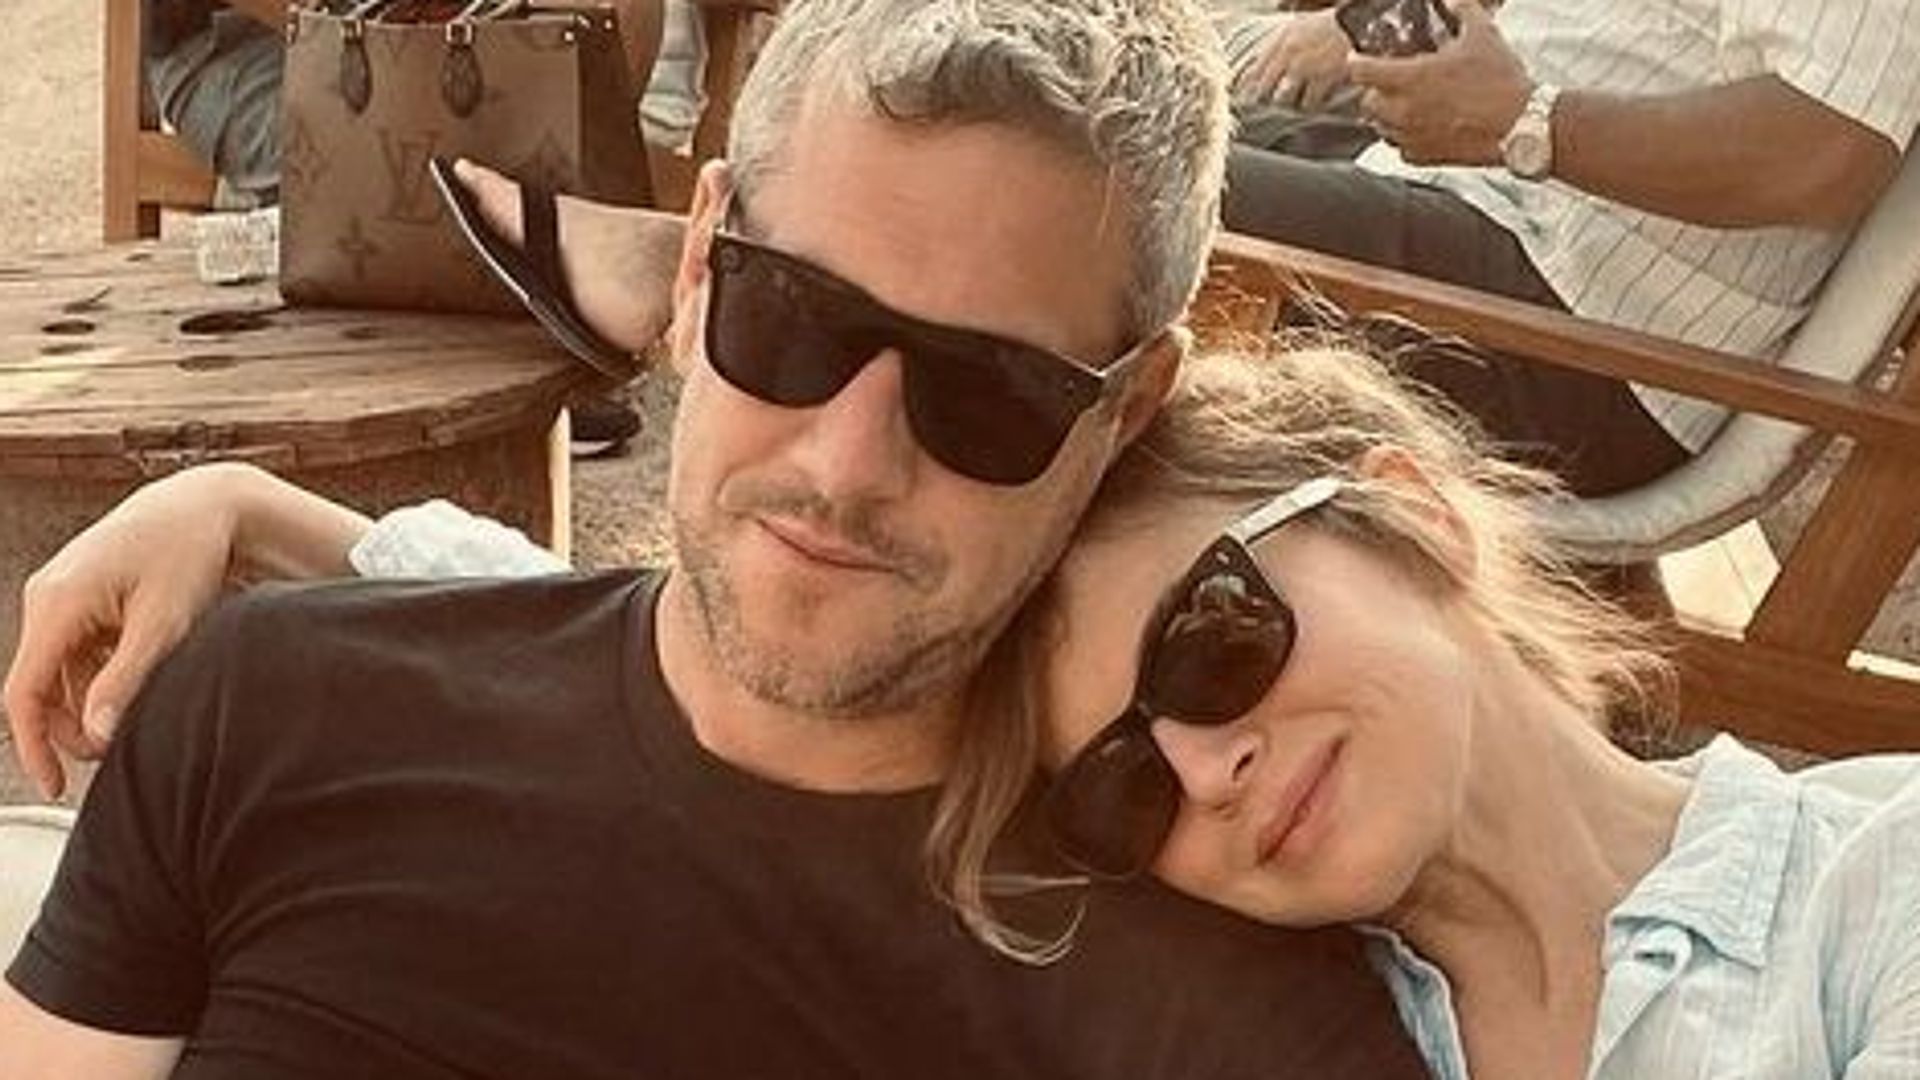 REnee Zellweger and Ant Anstead relax on the beach together